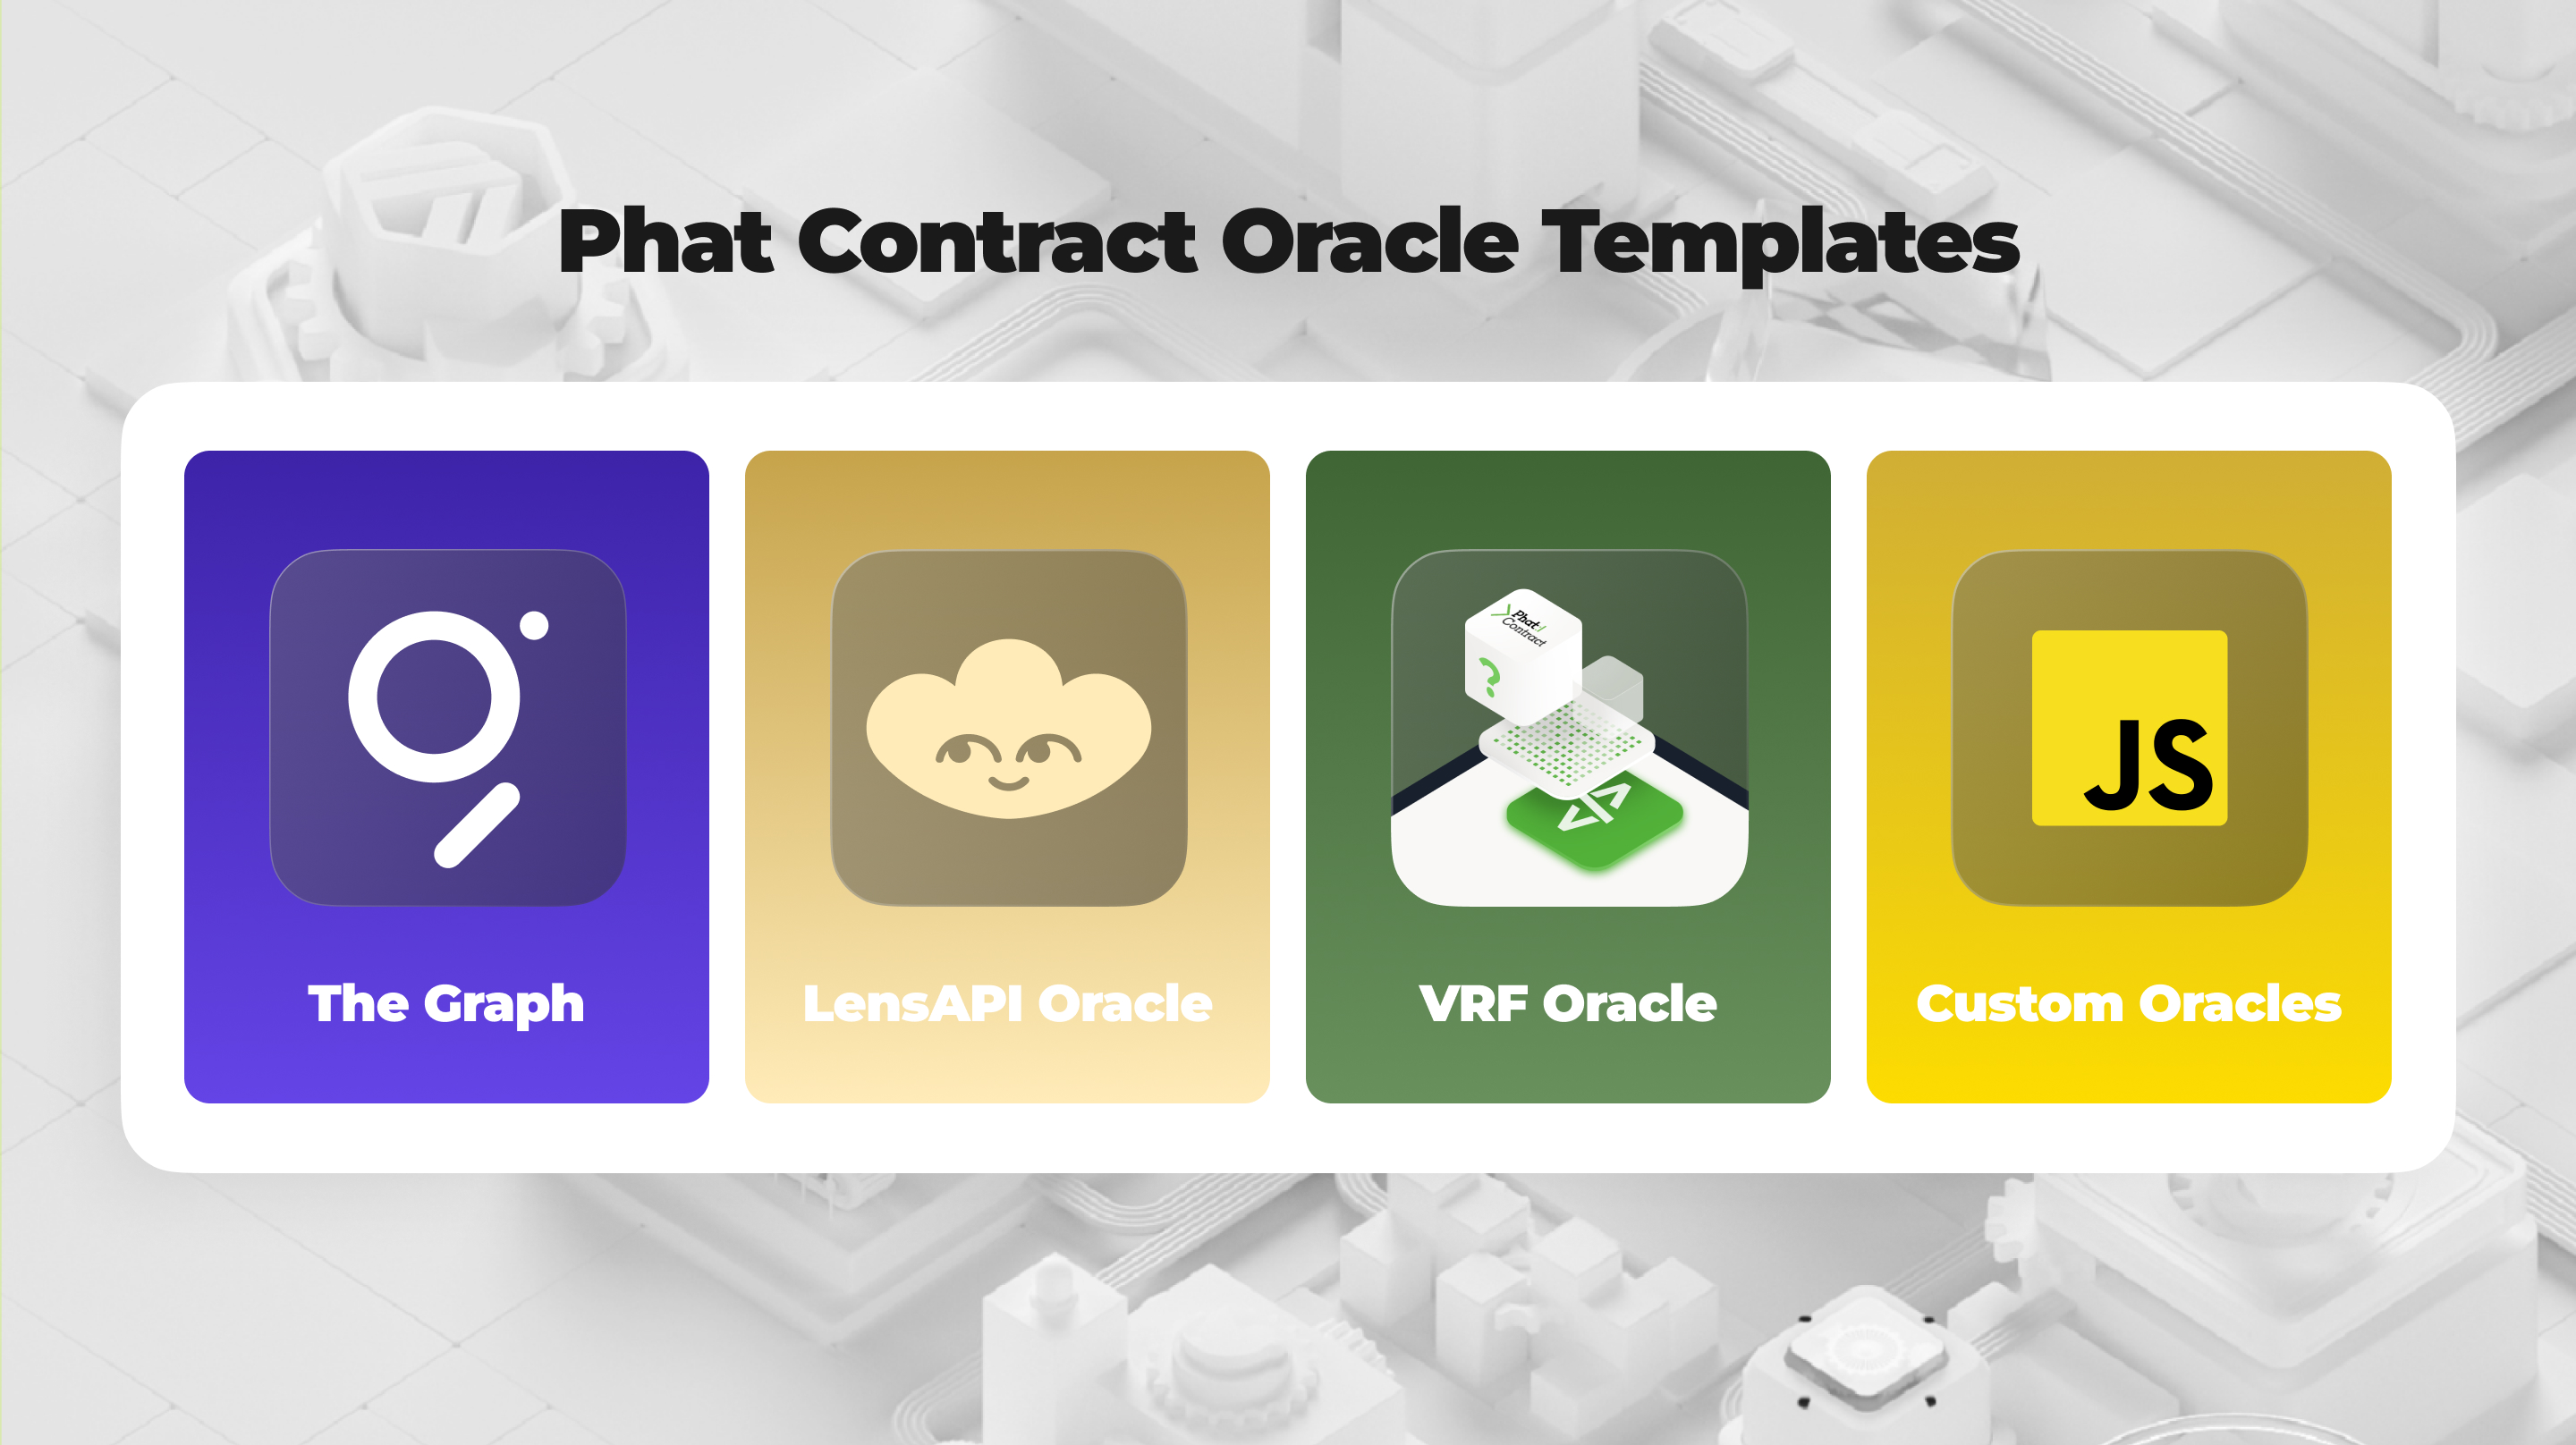 Phat Contract Oracle templates across specific use cases and custom oracle to design custom use case.